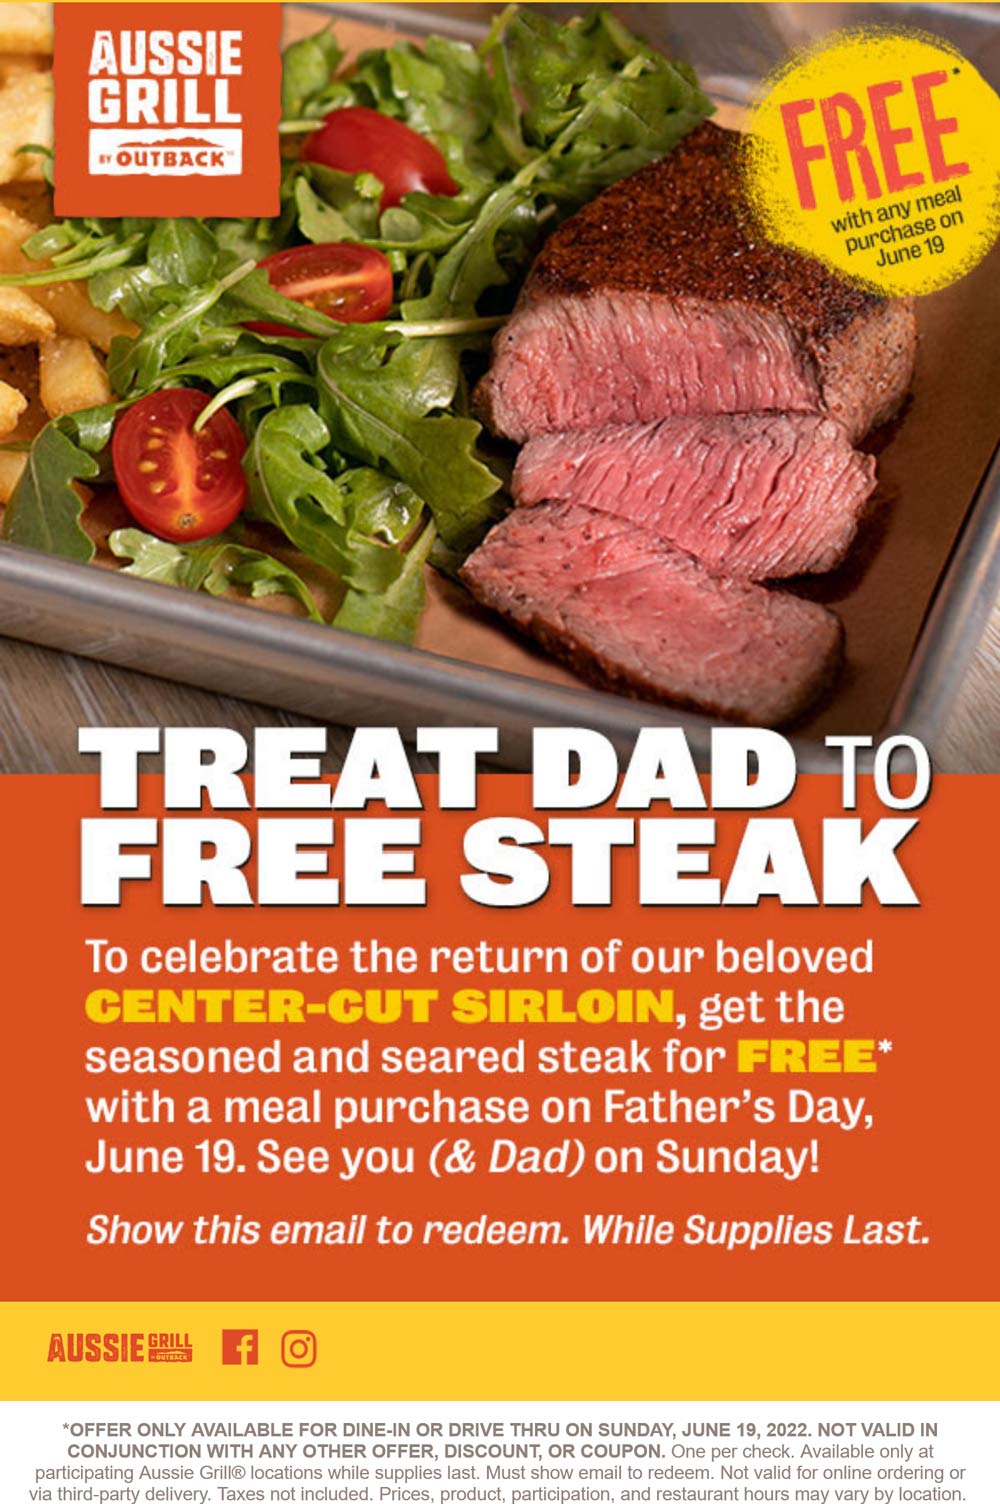 Aussie Grill restaurants Coupon  Free steak with your meal Sunday at Outback Steakhouse Aussie Grill locations #aussiegrill 